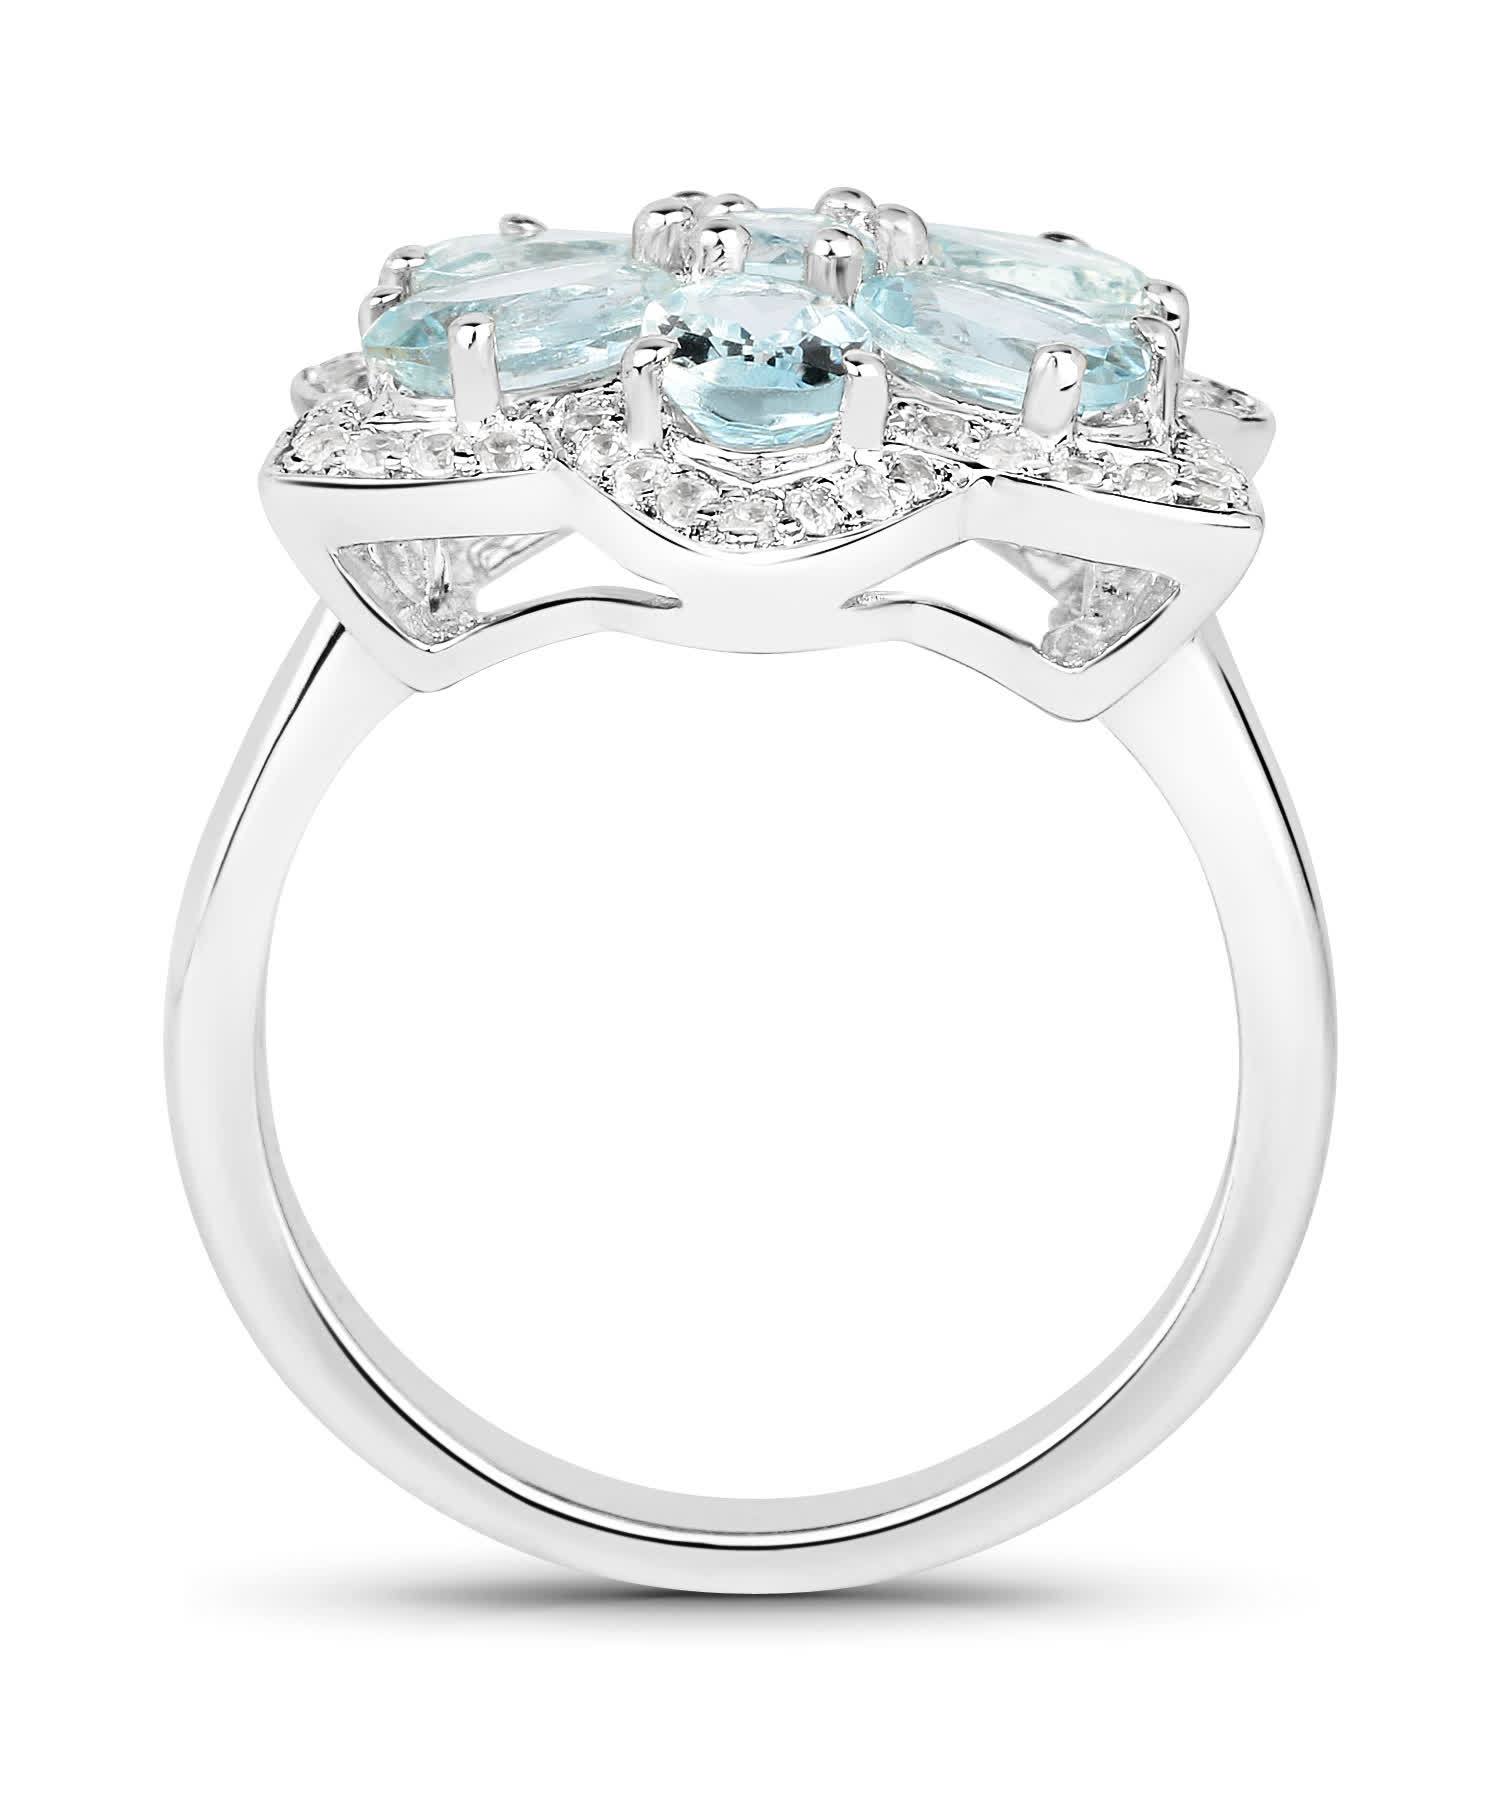 2.88ctw Natural Icy Sky Blue Aquamarine and Zircon Rhodium Plated 925 Sterling Silver Flower Cocktail Ring View 2